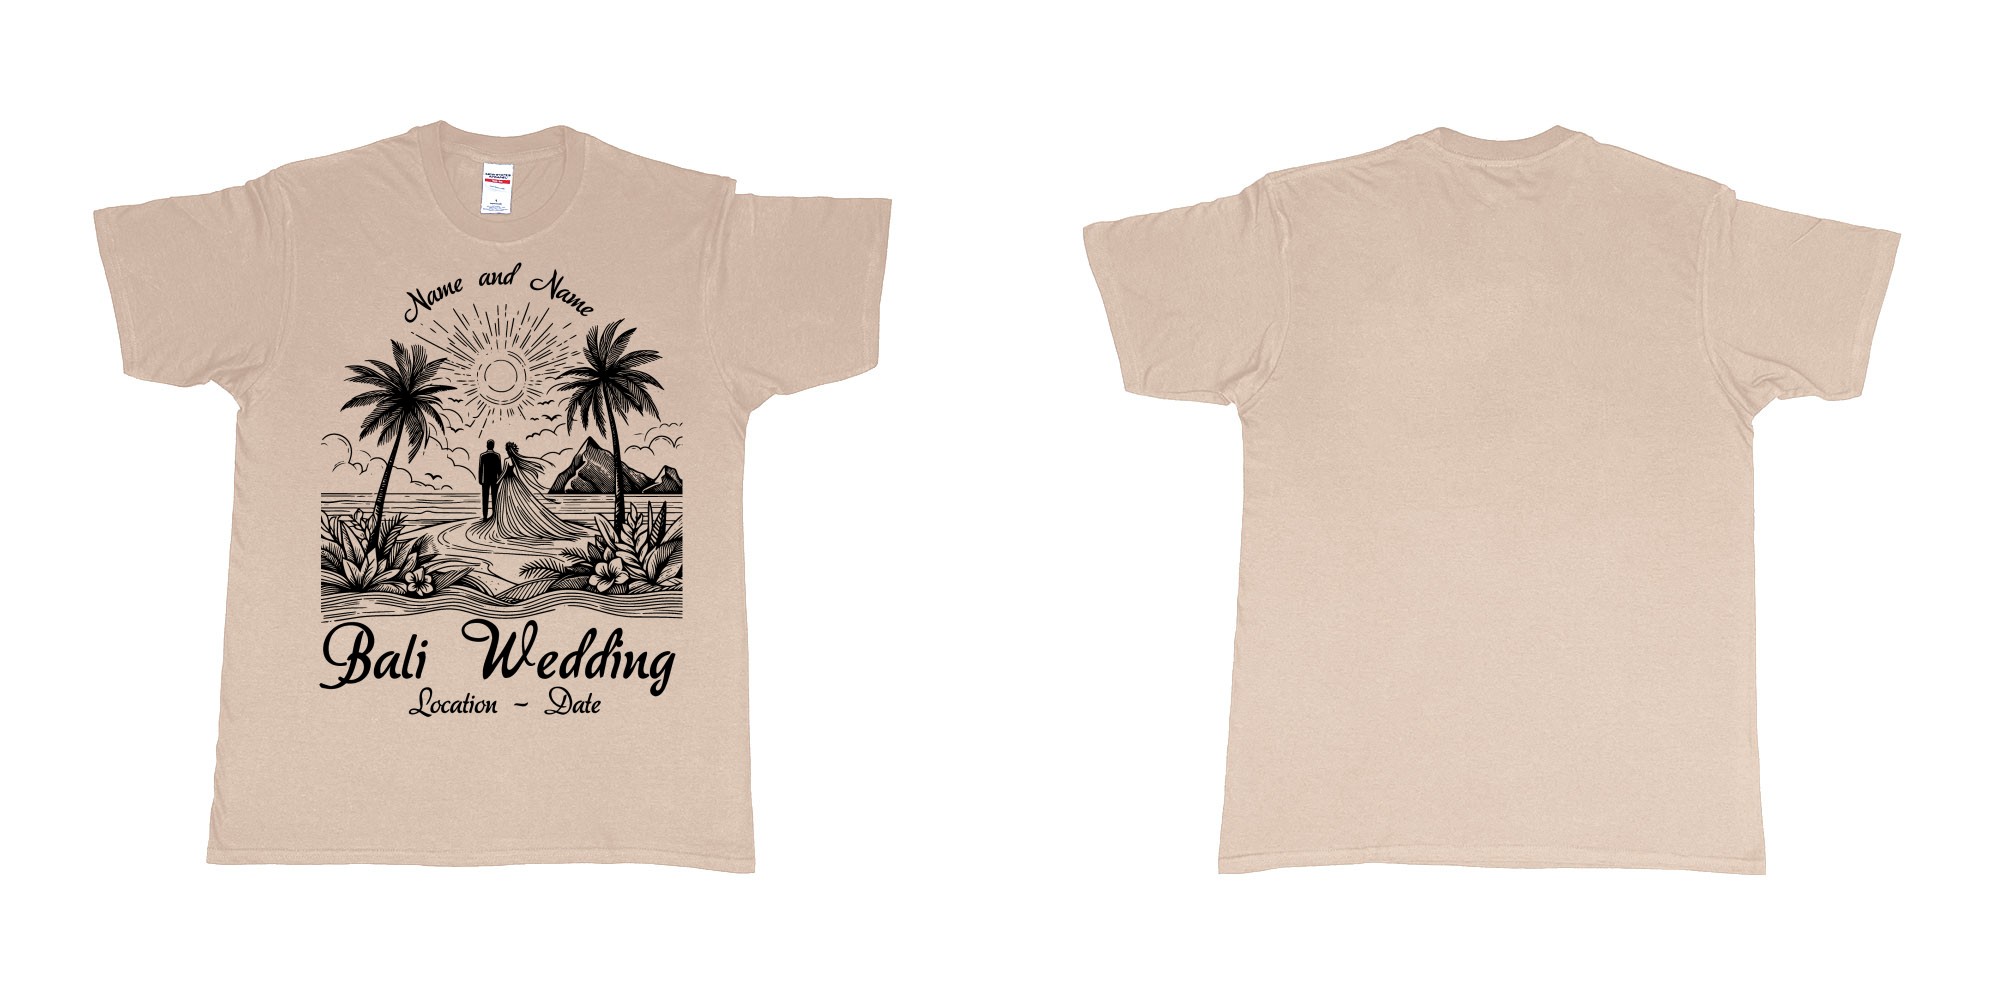 Custom tshirt design bali wedding drawing couple beach sunset palmtrees in fabric color sand choice your own text made in Bali by The Pirate Way